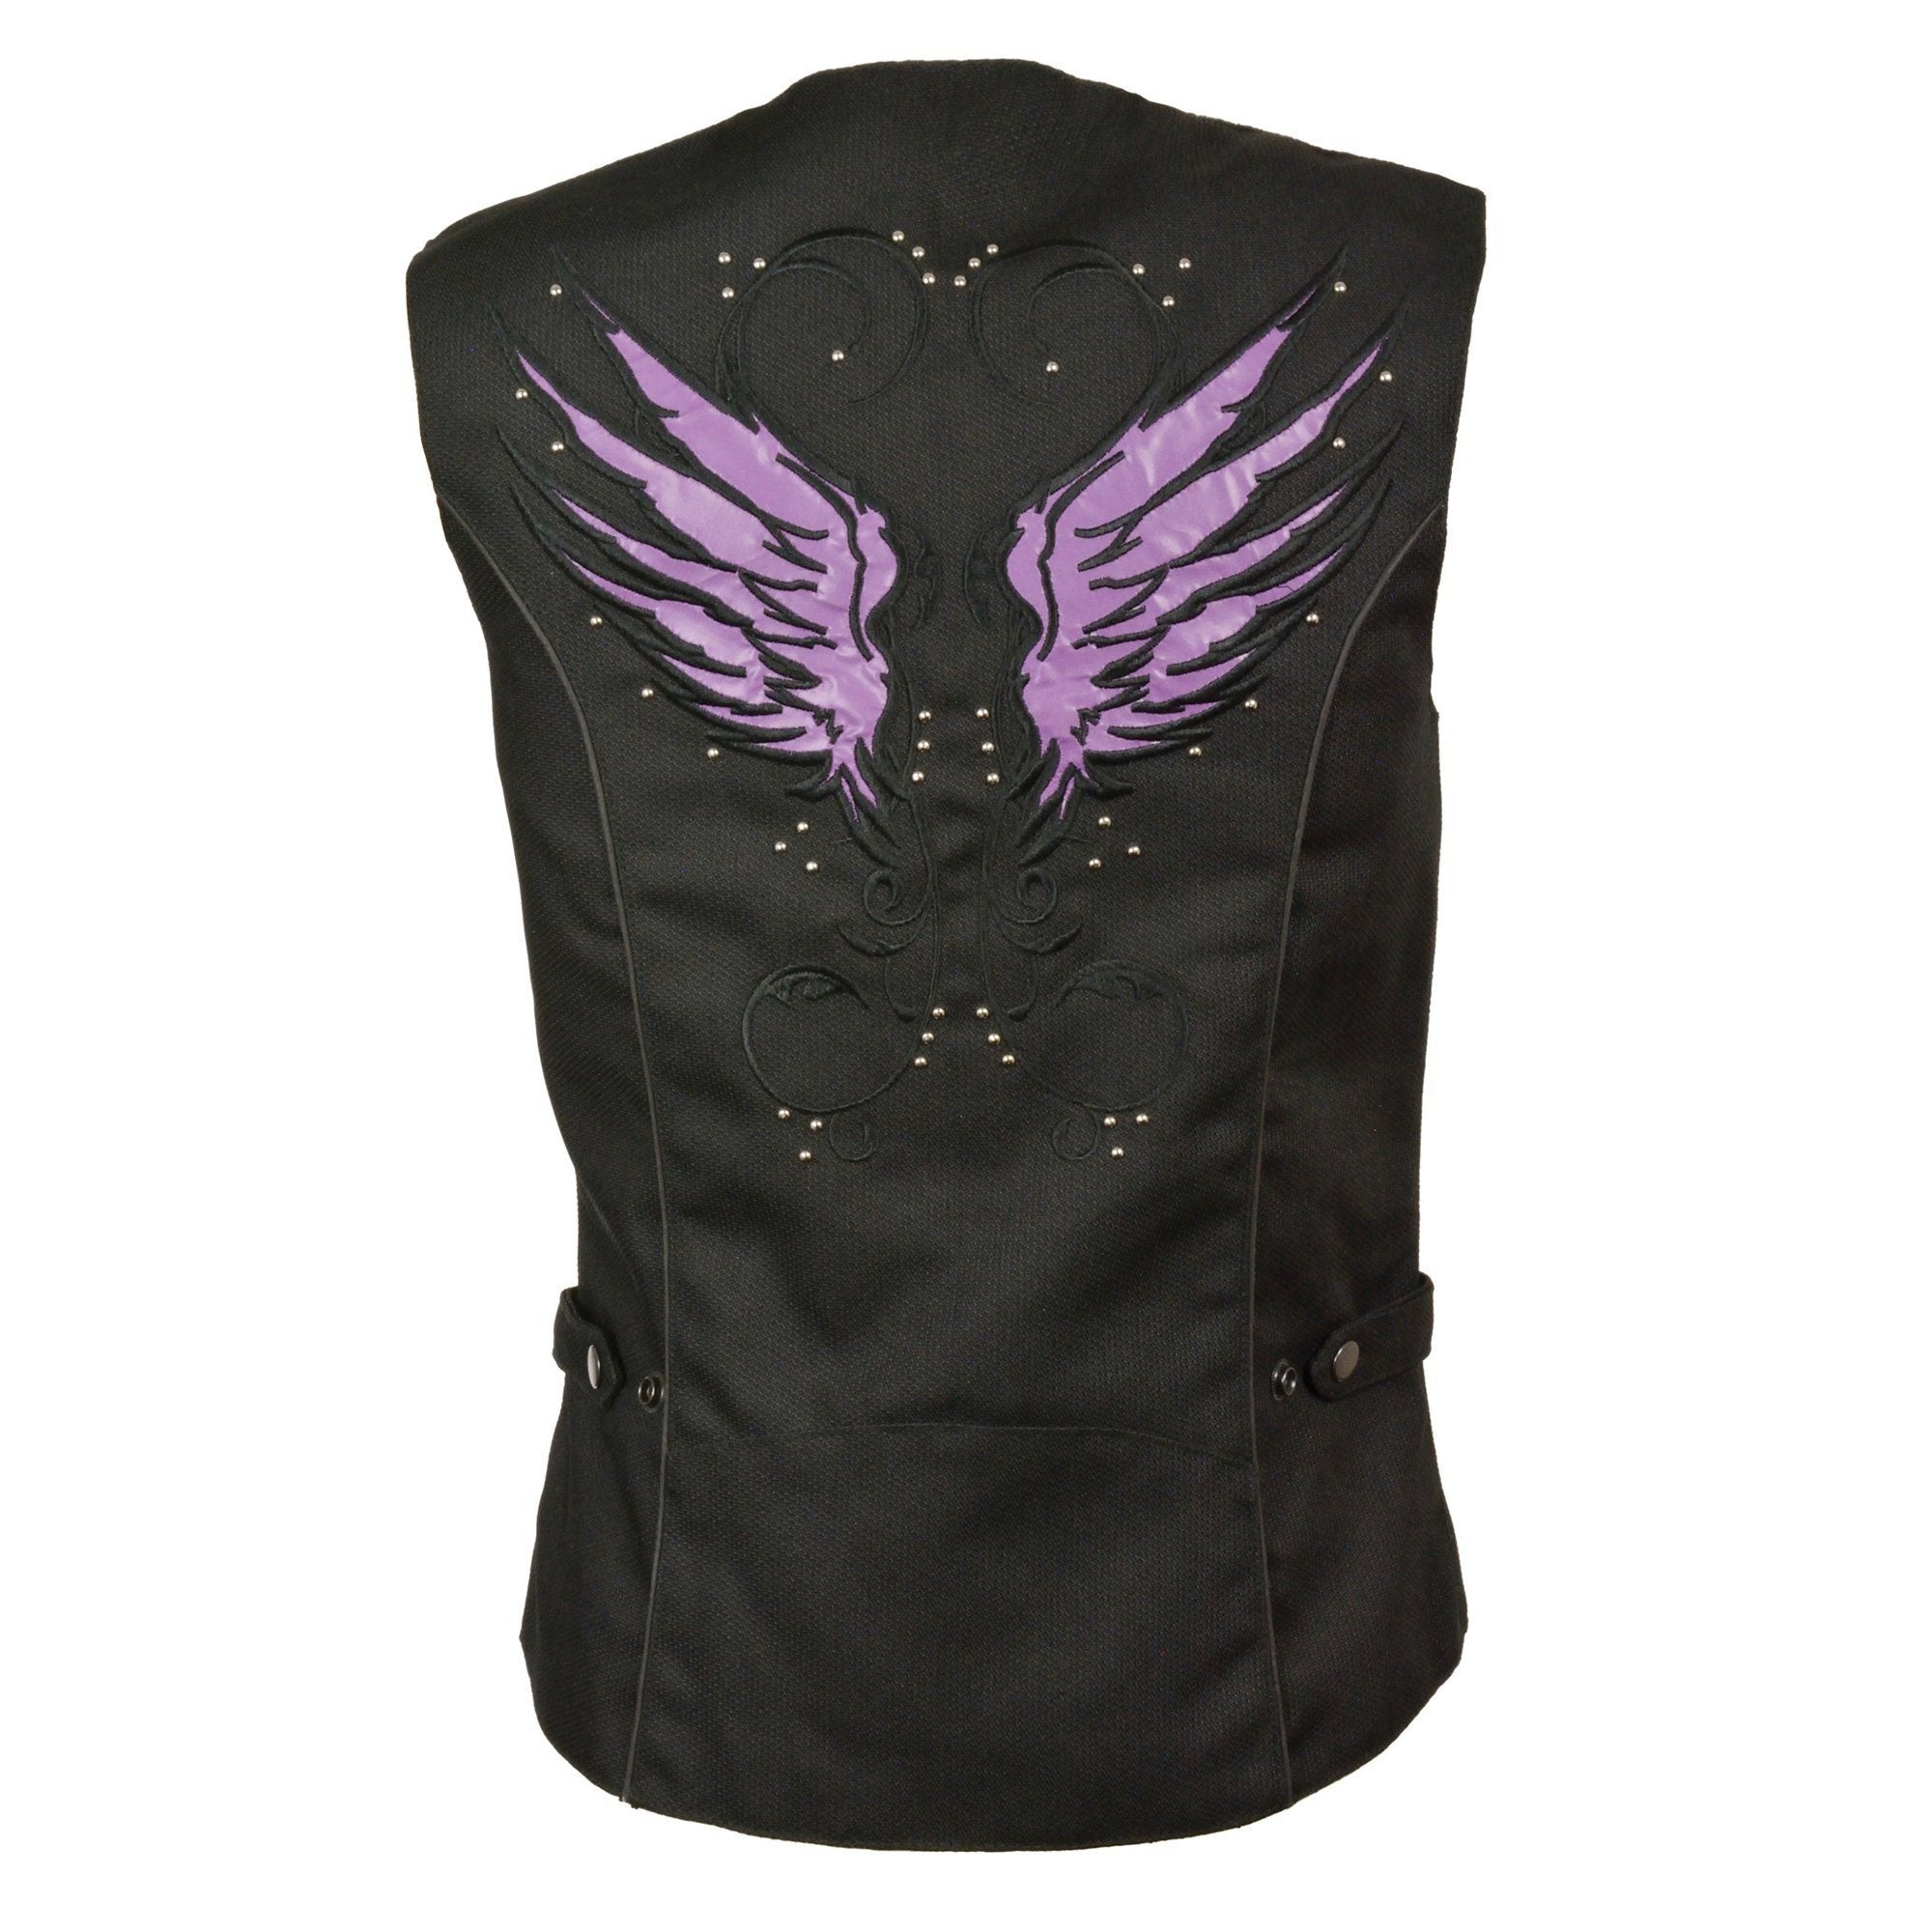 Milwaukee Performance SH1955 Ladies Black and Purple Textile Vest with Wing Embroidery - Milwaukee Performance Womens Textile Vests